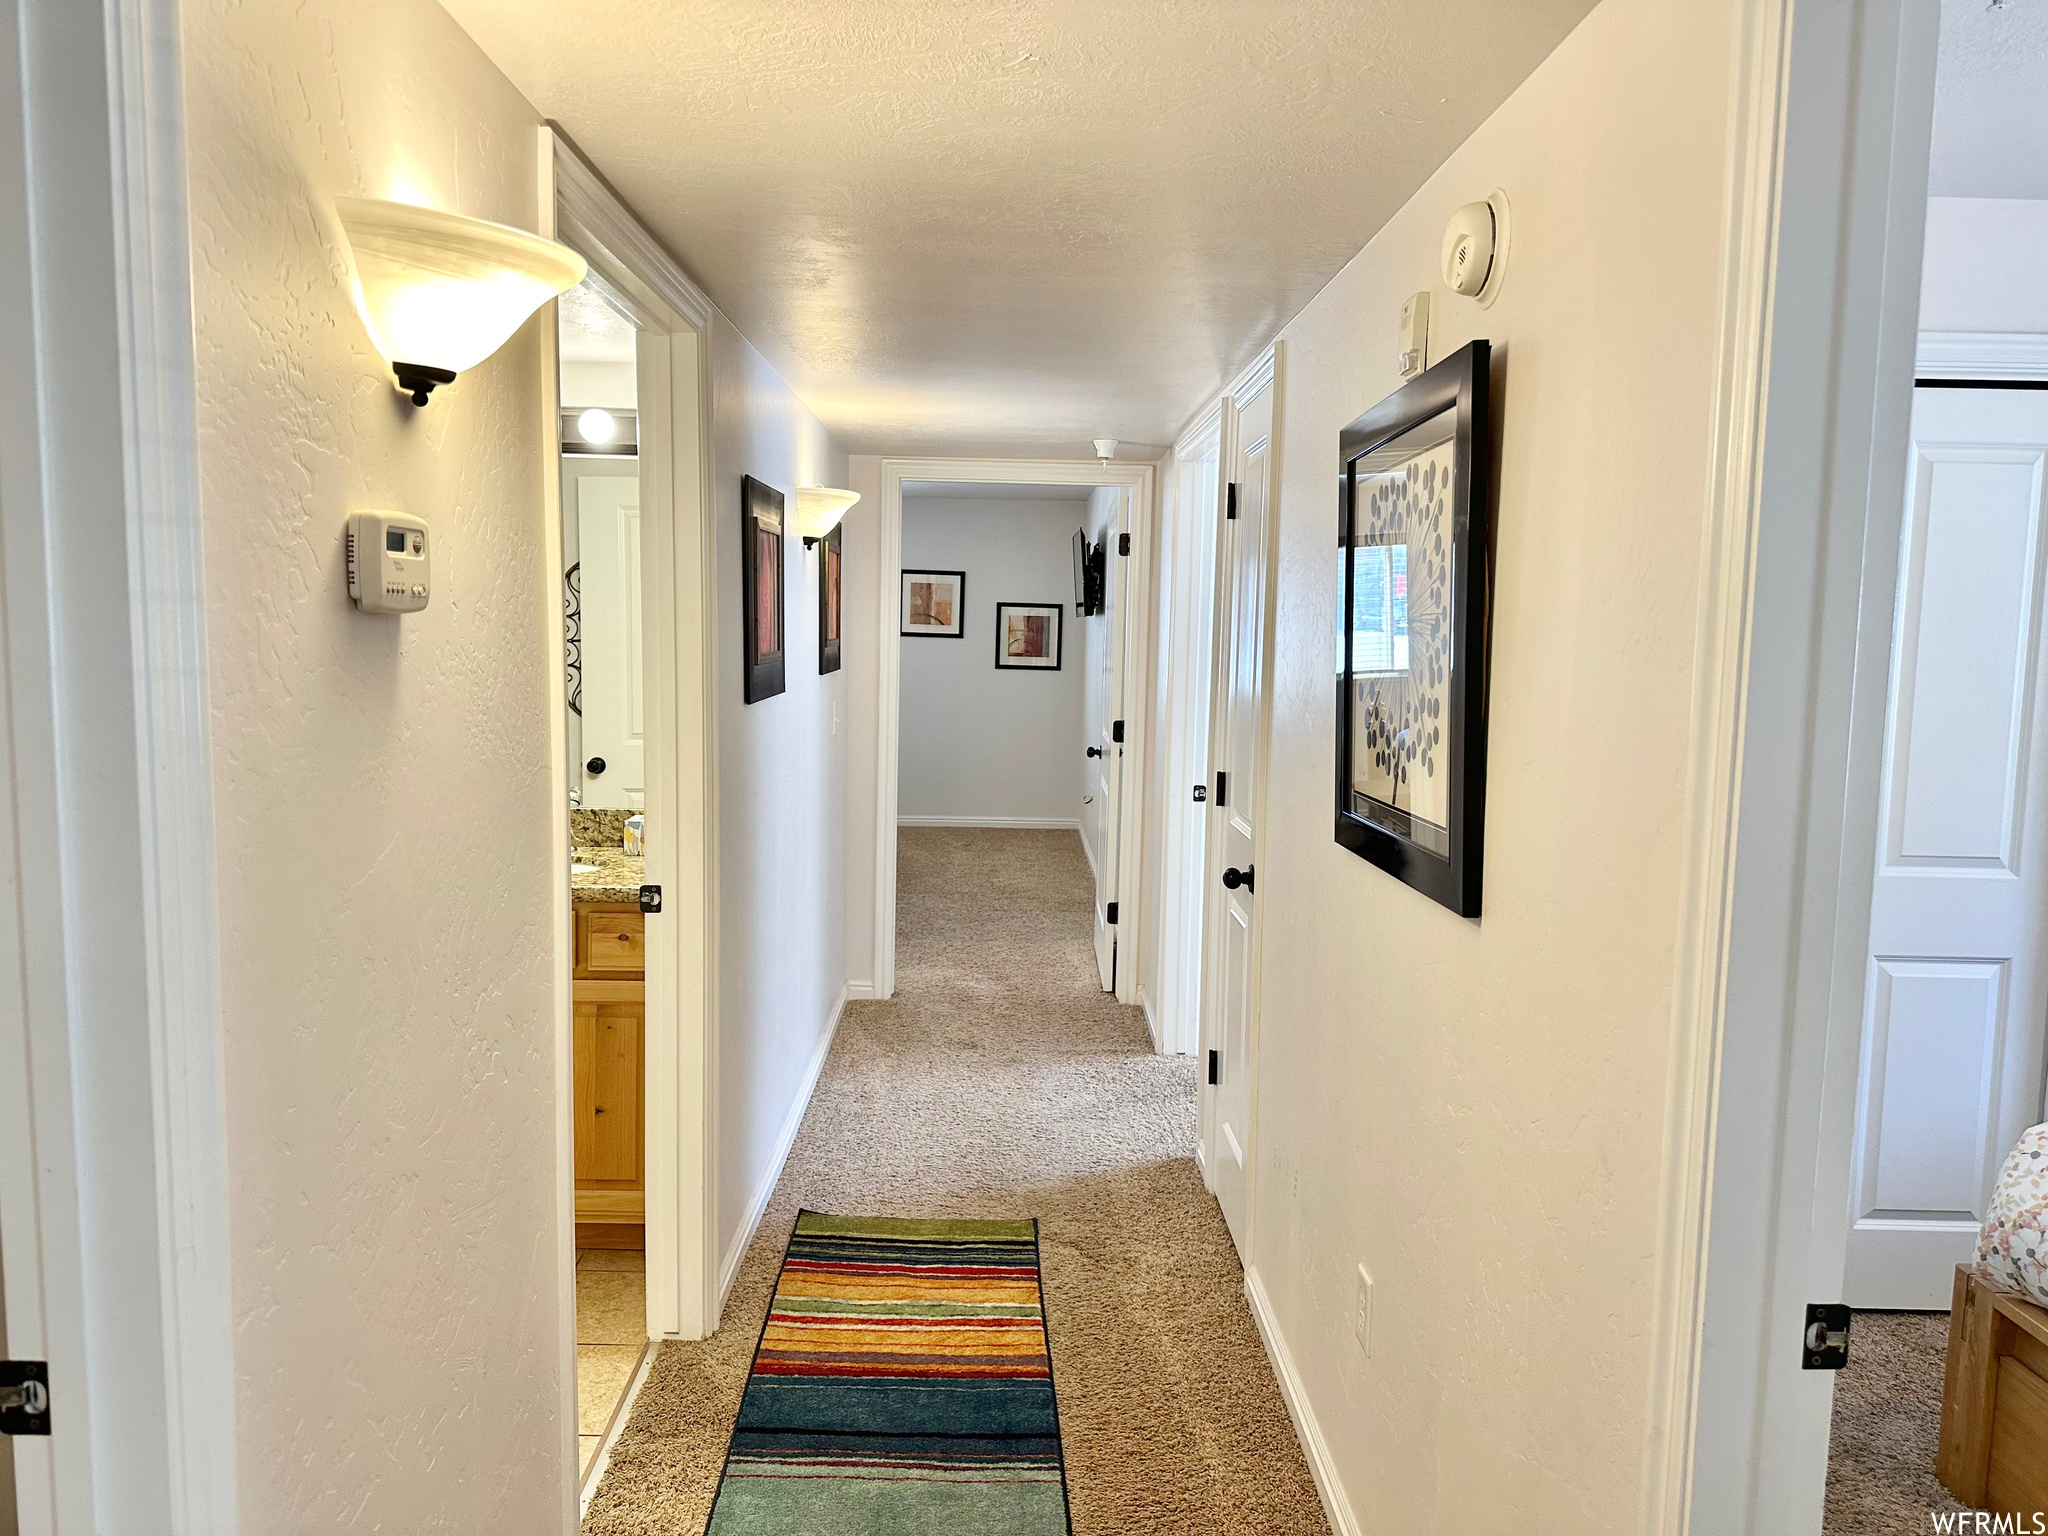 Corridor with light colored carpet and a textured ceiling